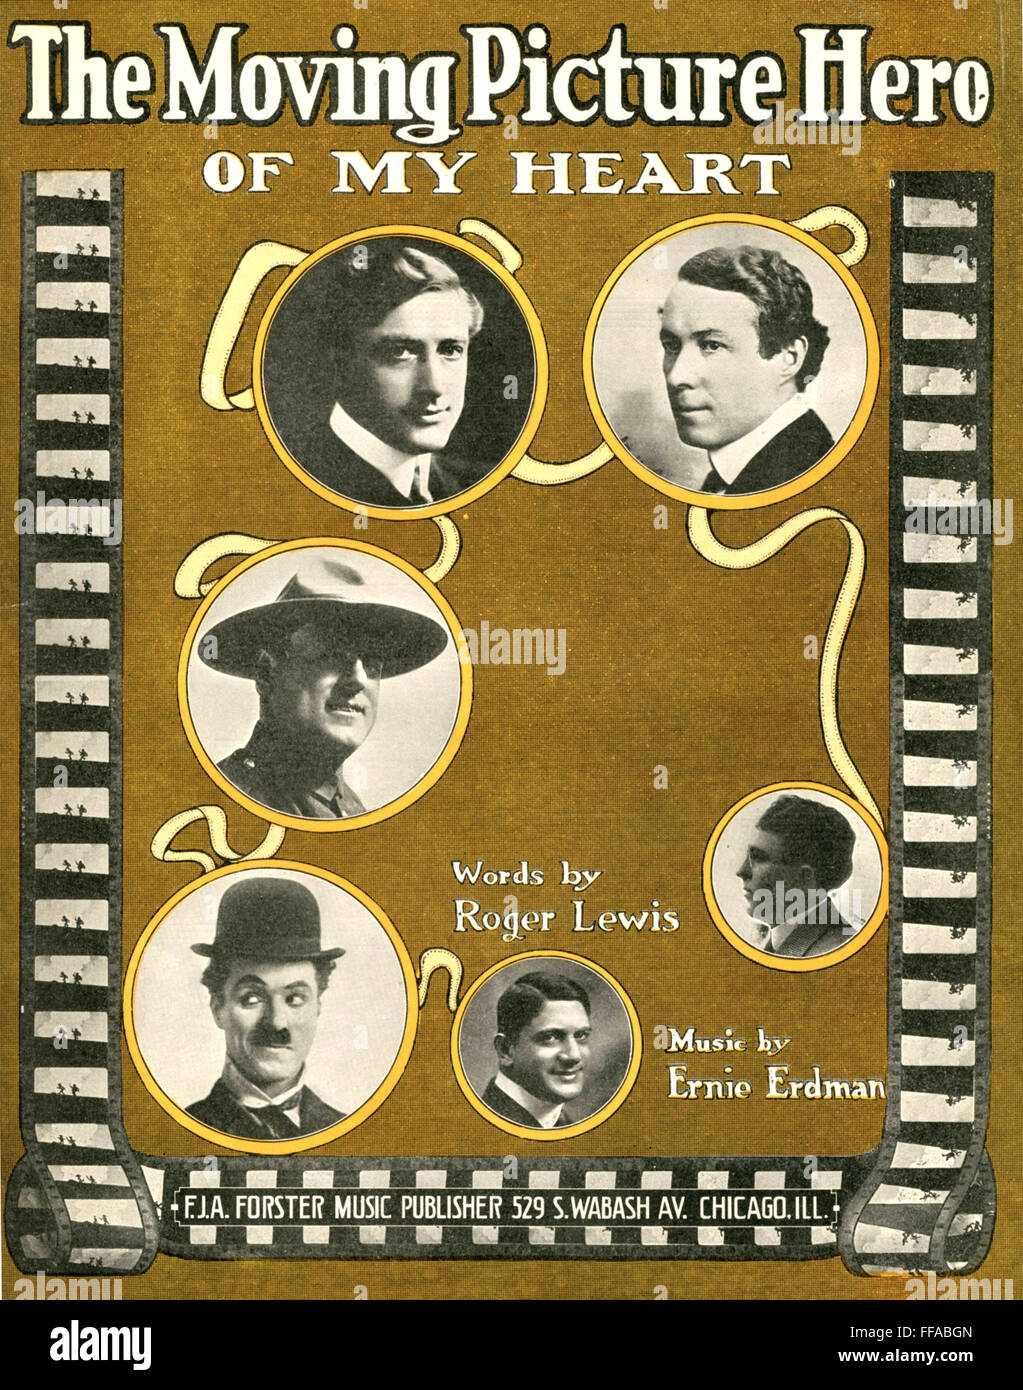 THE MOVING PICTURE HERO OF MY HART Cover of 1916 sheet music showing silent film stars of the period. Clockwise from top right: Henry Walthall, unknown, Francis X. Bushman, Charles Chaplin, Gilbert 'Broncho' Billy Anderson, unknown Stock Photo